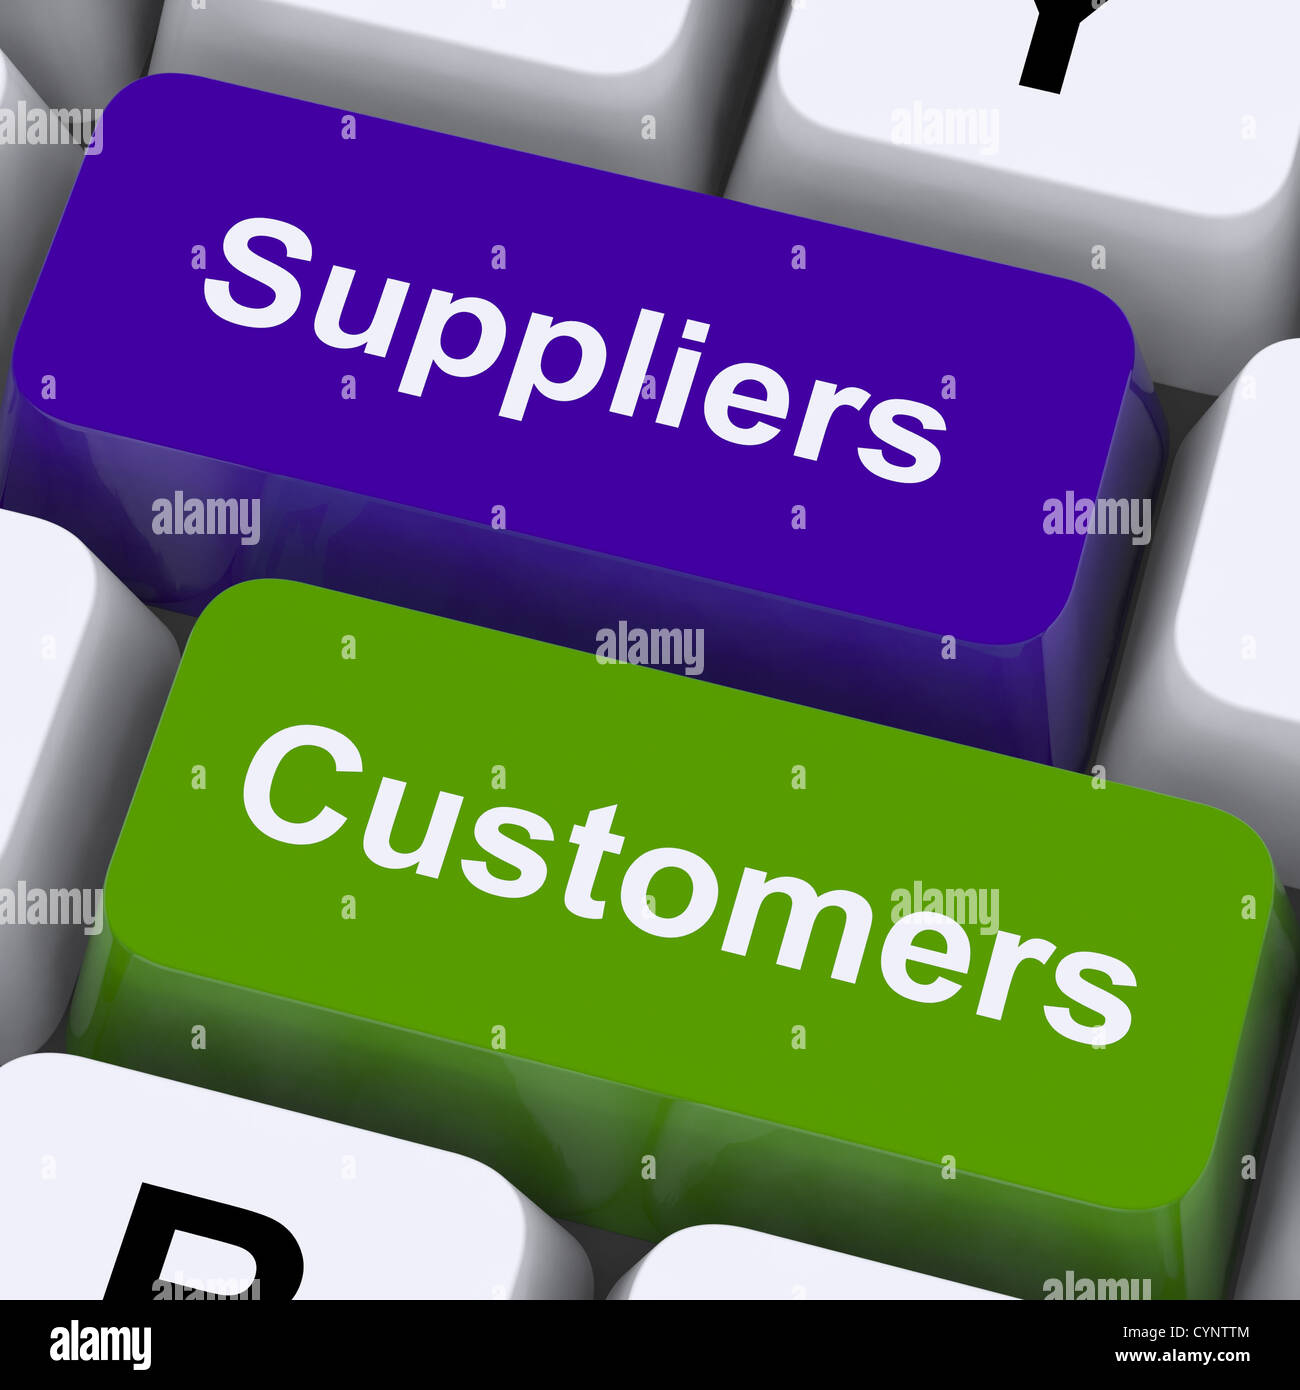 Suppliers And Customers Keys Showing Supply Chain Or Distribution Stock Photo